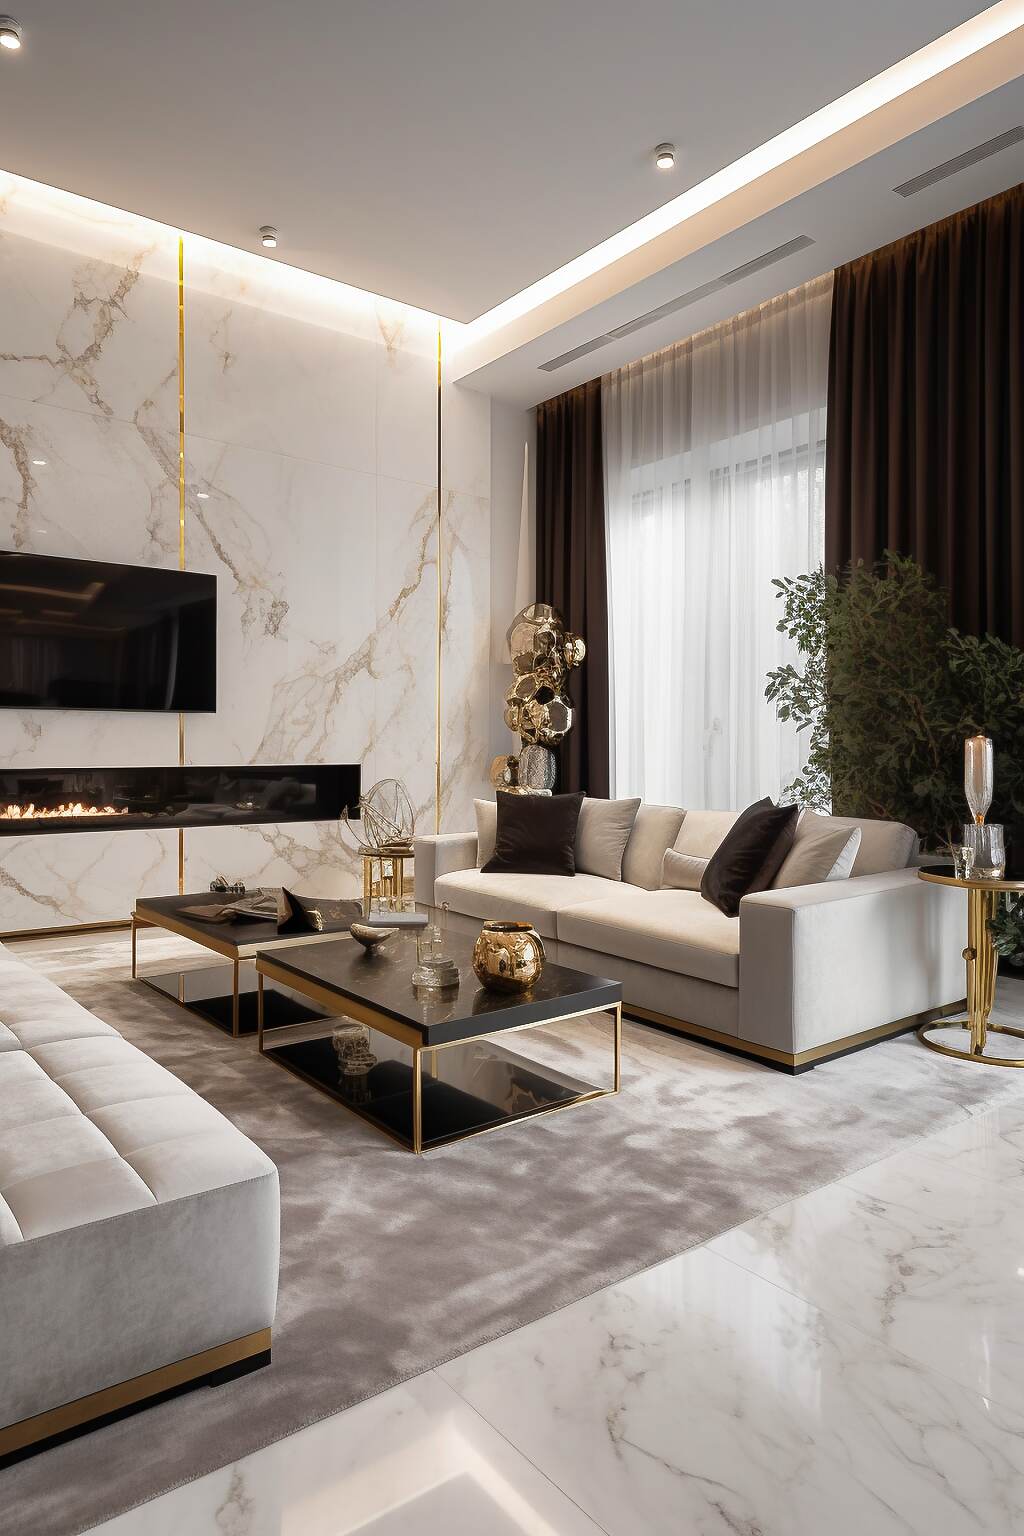 Timeless Meets Contemporary In This Luxury Living Room With A White Italian Designer Sofa